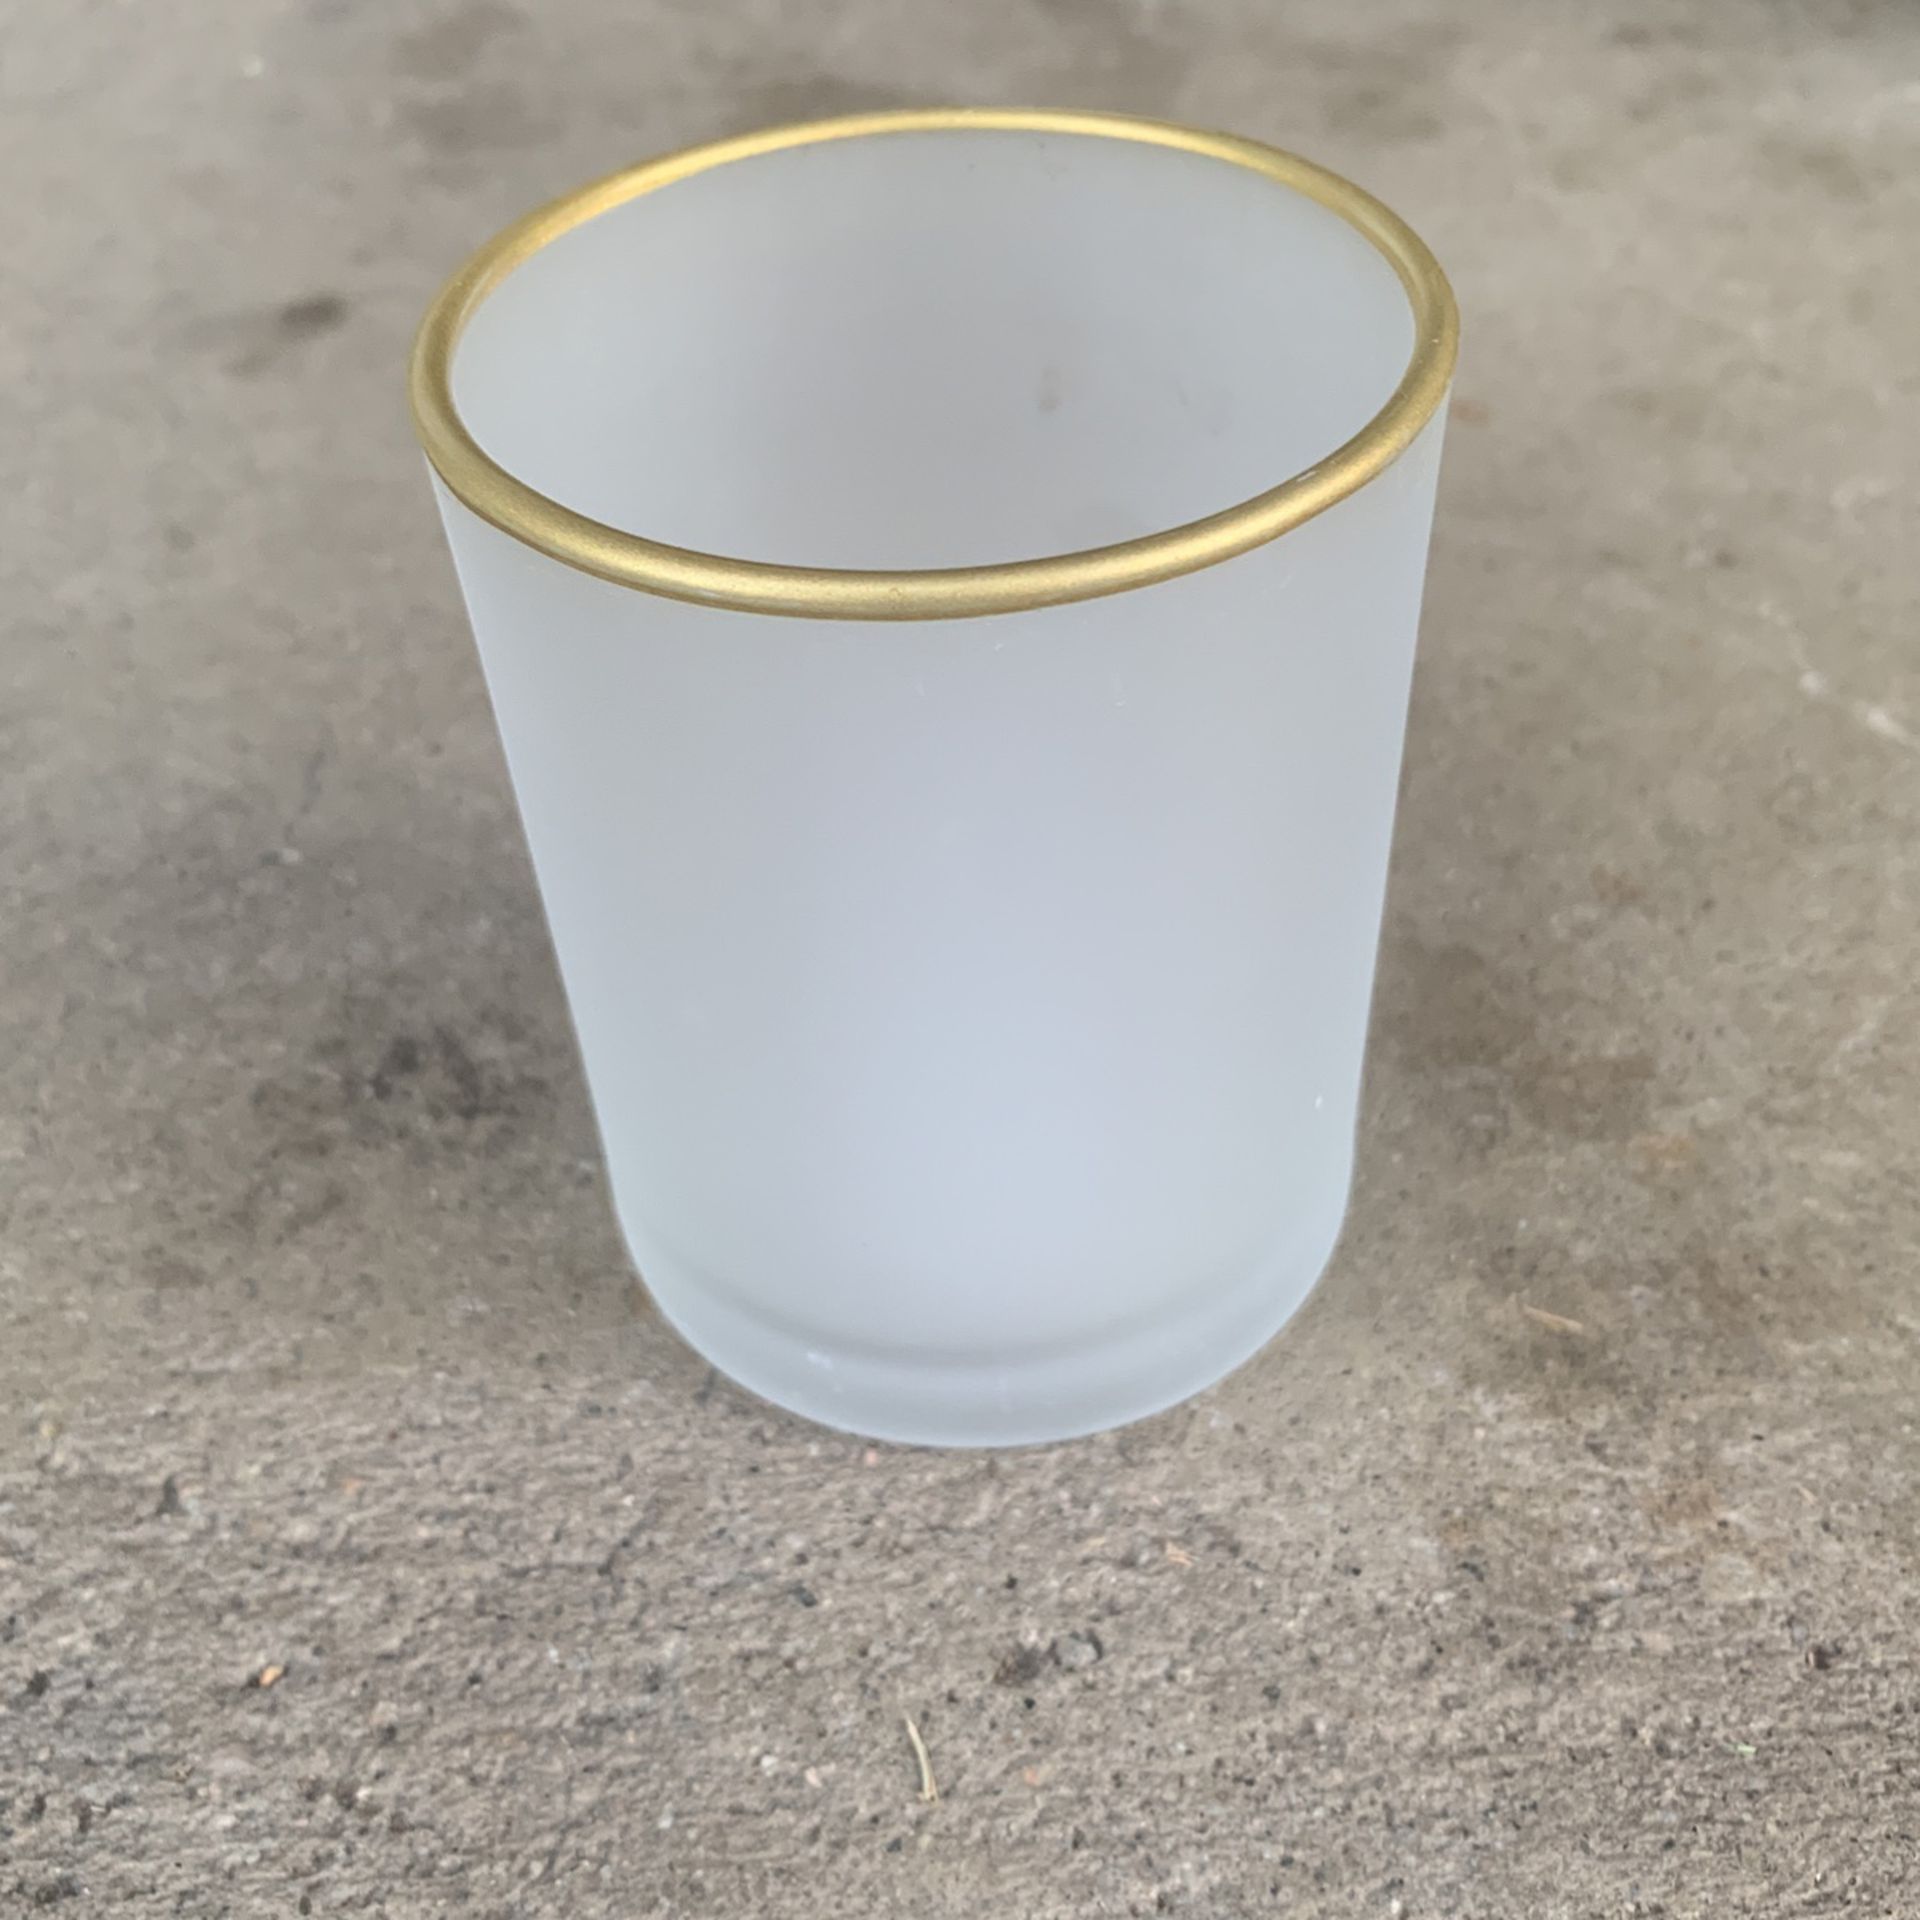 60 - Frosted Candleholder Tumblers with Gold Rims, 3.25x2.75 in.